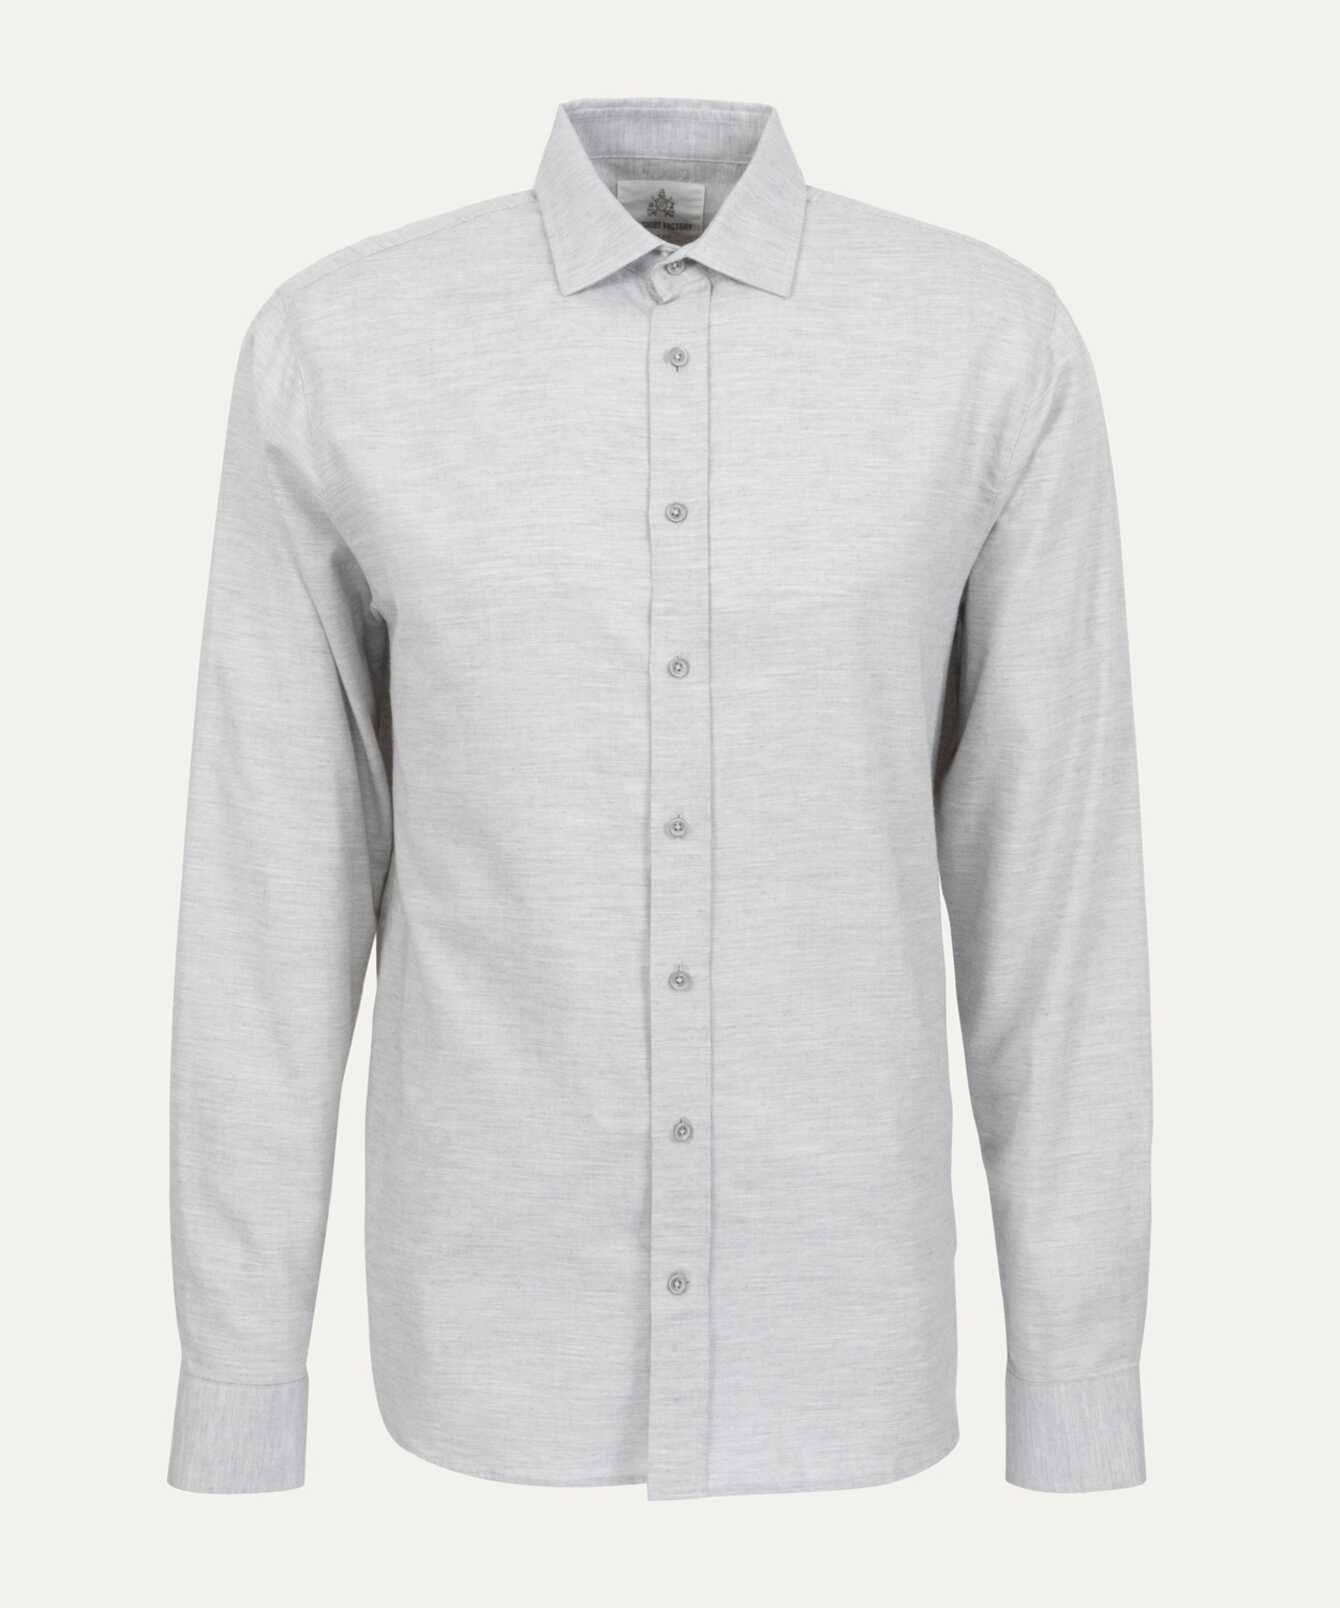 Shirt Costello Light Grey Twill Shirt in Brushed Cotton The Shirt Factory